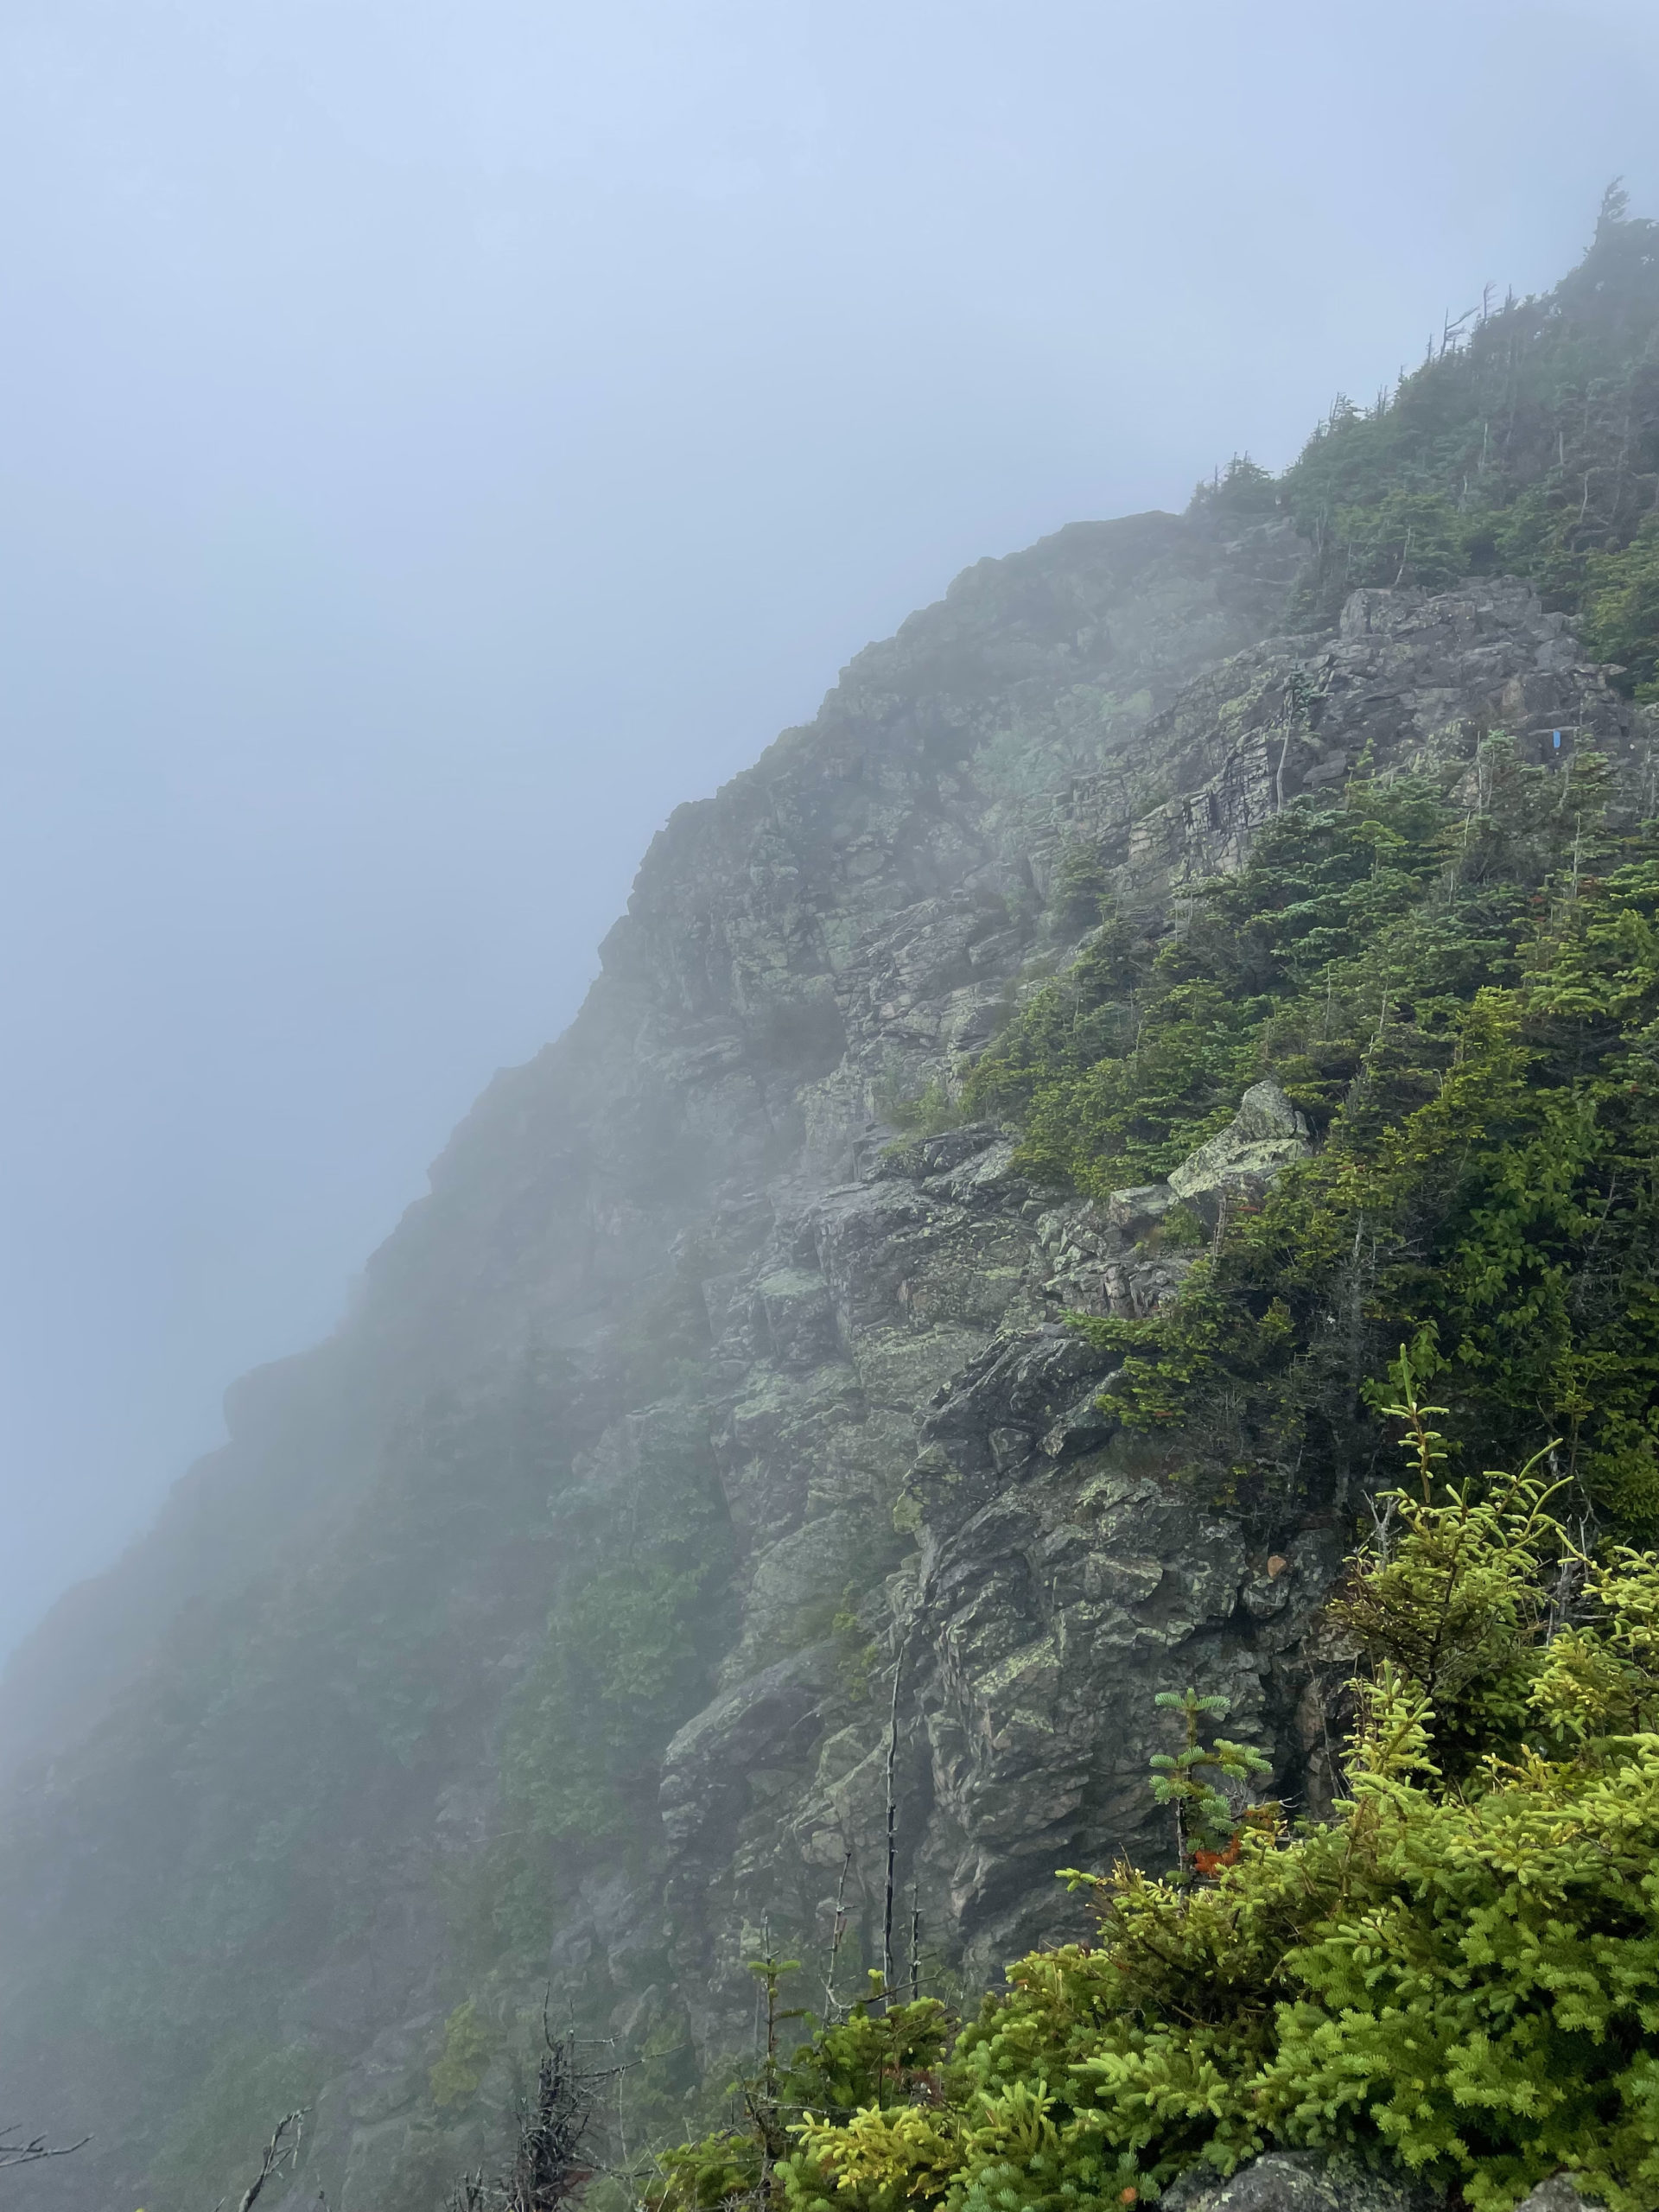 Franconia Ridge in the mist, seen while hiking Mt. Liberty and Mt. Flume on the Flume Slide Trail in the White Mountain National Forest, New Hampshire